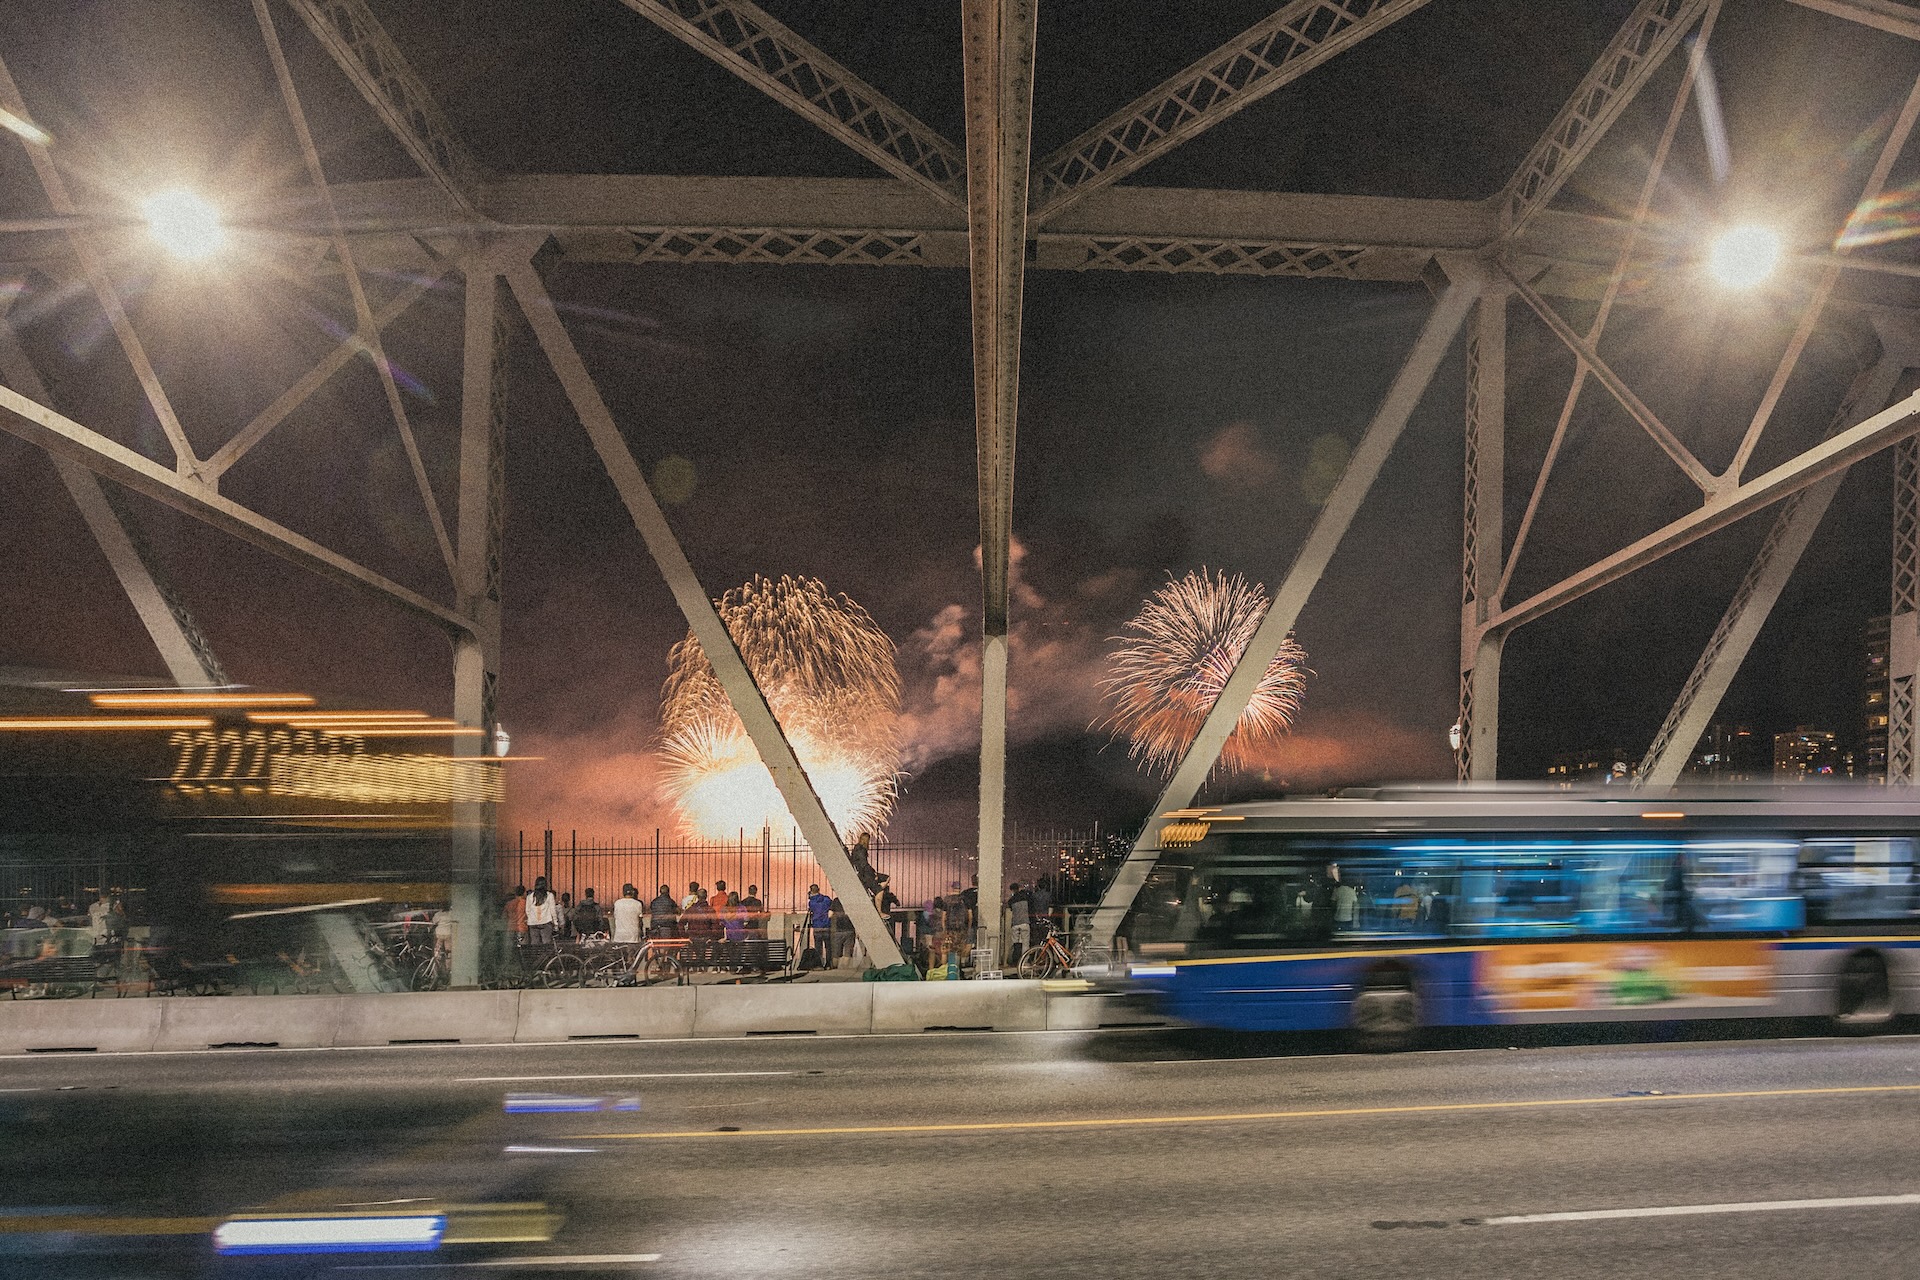 A bus driving on Burrard Street Bridge with the fireworks in the background